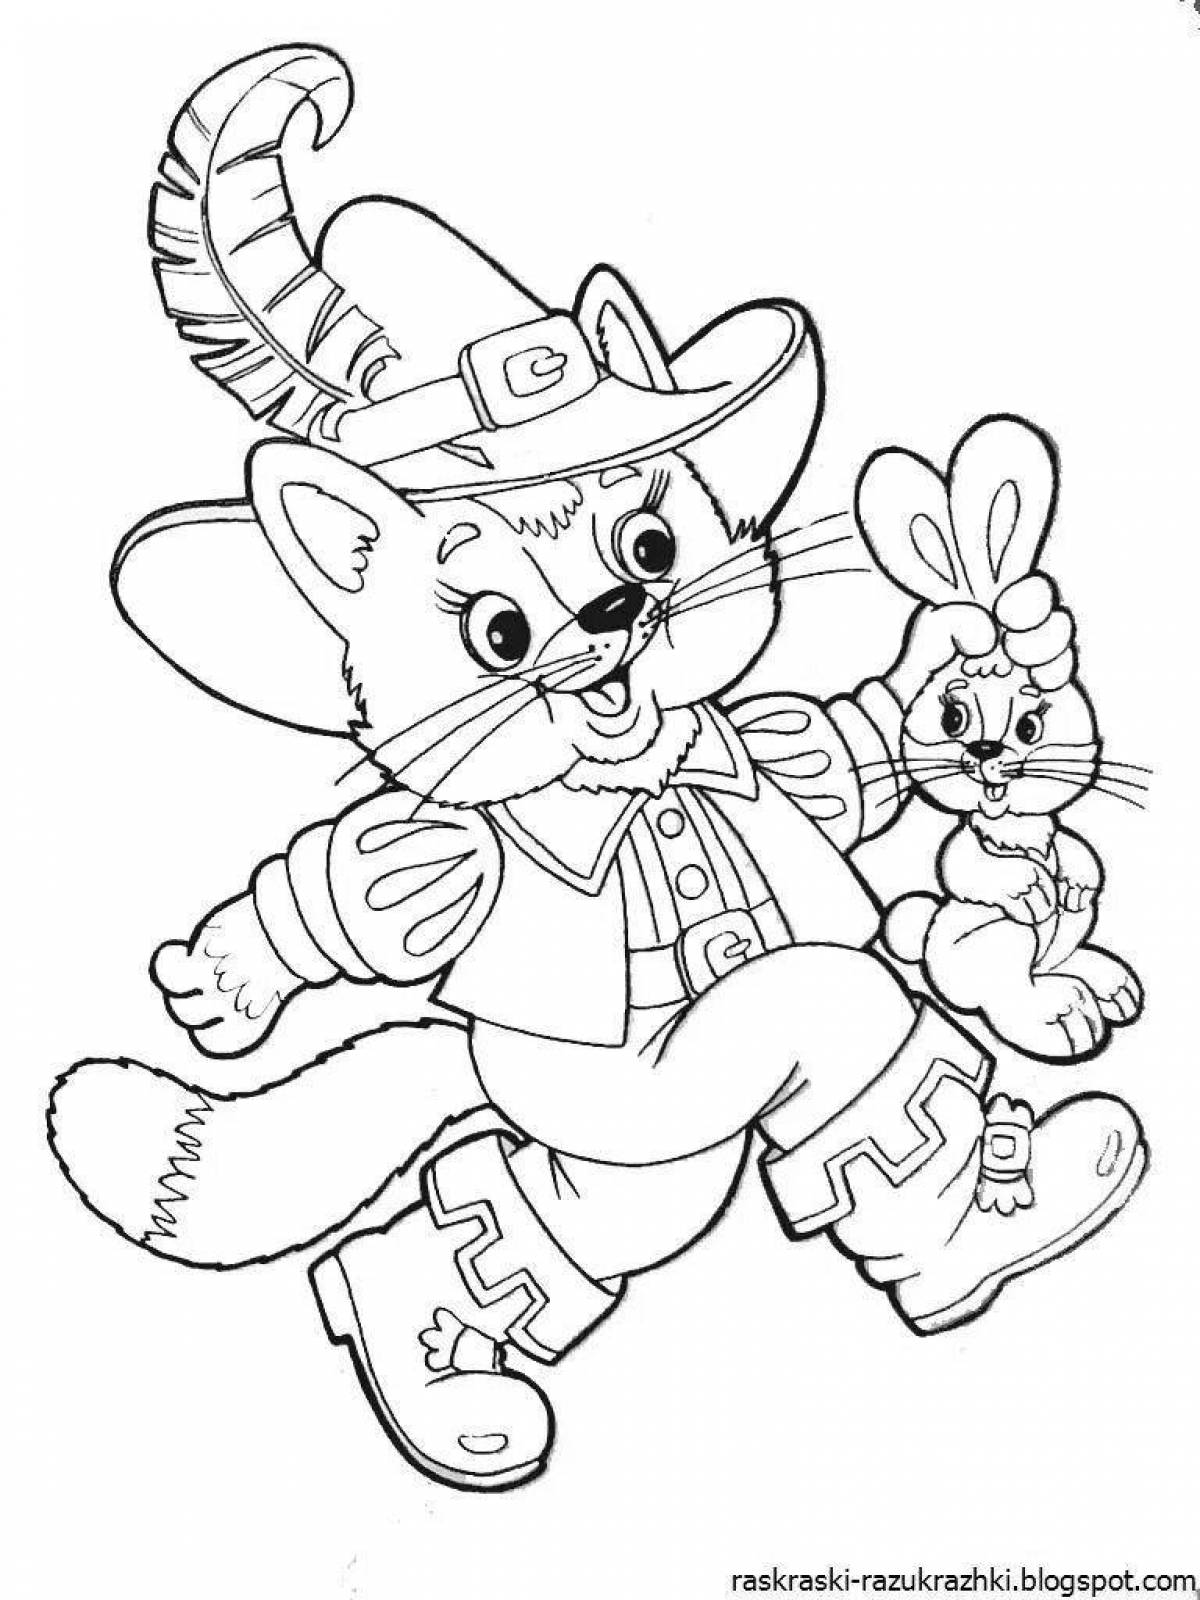 Sublime coloring pages heroes of fairy tales for children